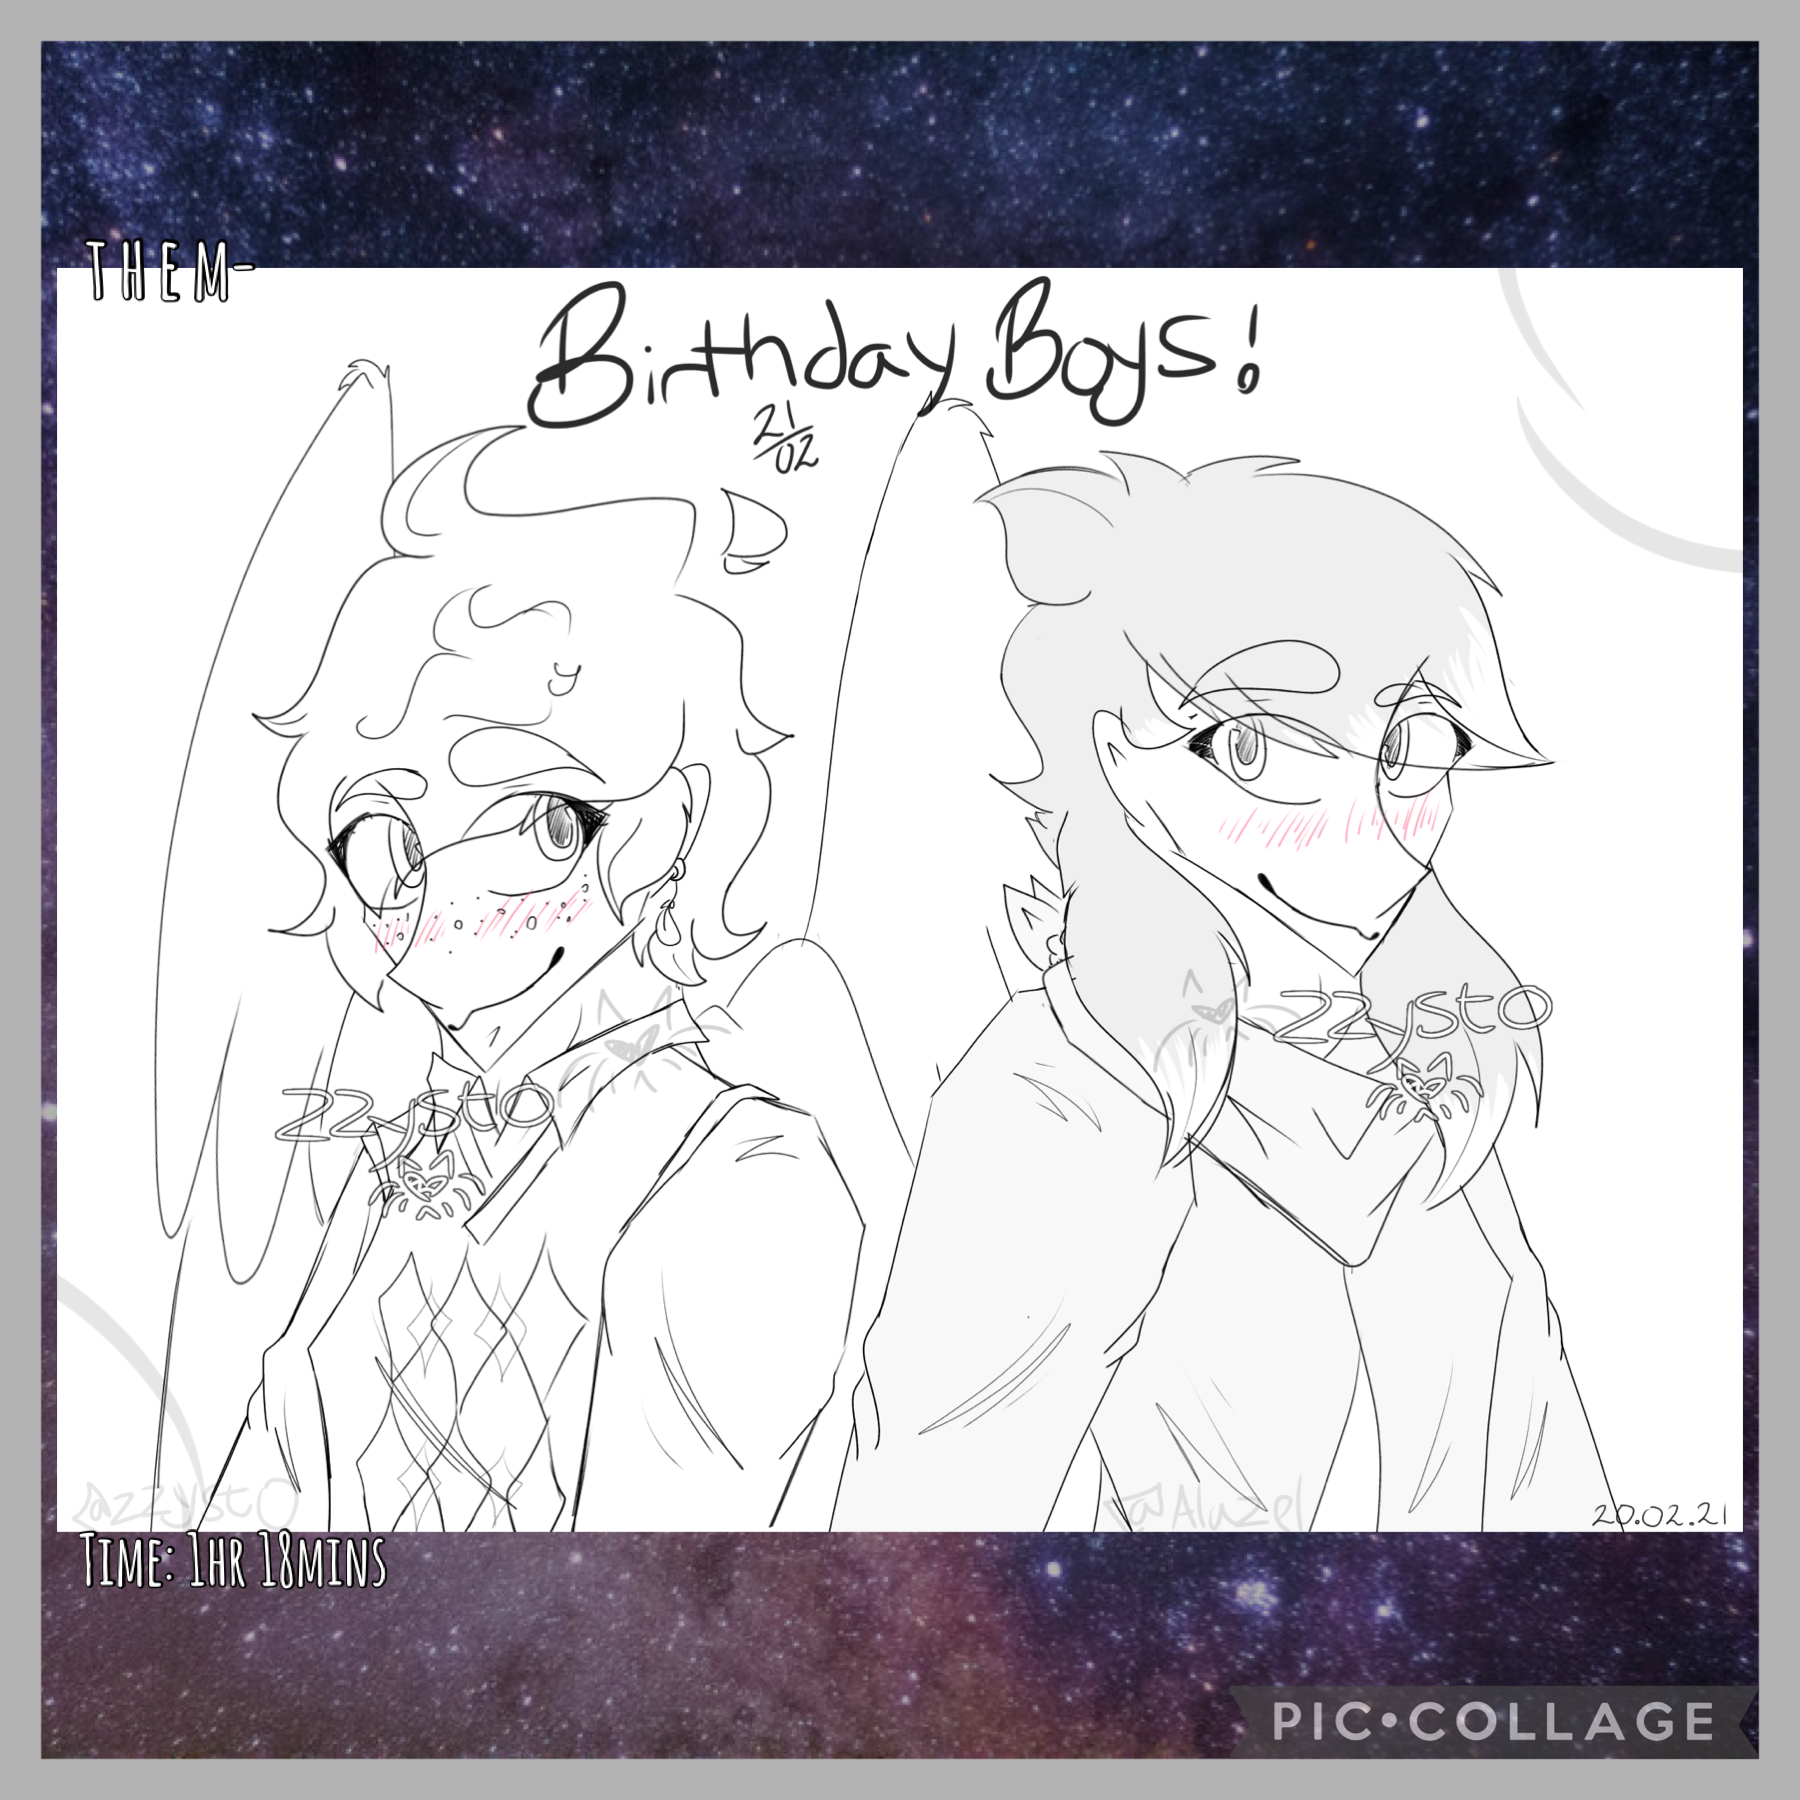 🪶Tap🪶
It’s my oc Charles, and Alazel’s oc Zee’s, second birthday today, ayyY
I find it so hard to believe Charles is now two years old wh,, he literally hasn’t changed at all lmaø